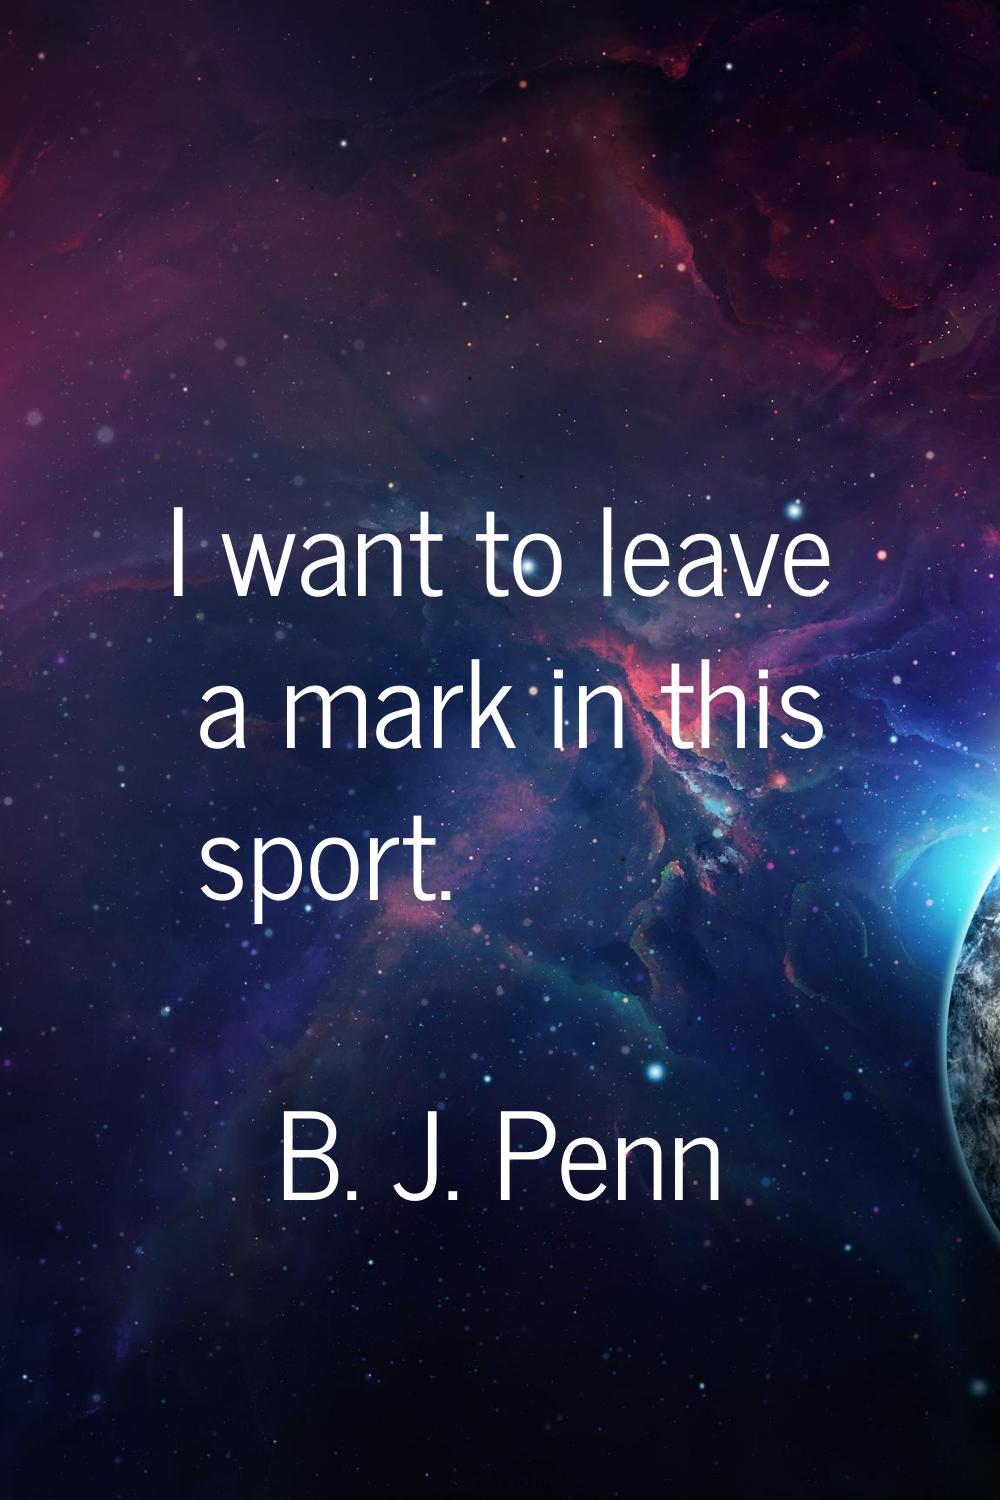 I want to leave a mark in this sport.